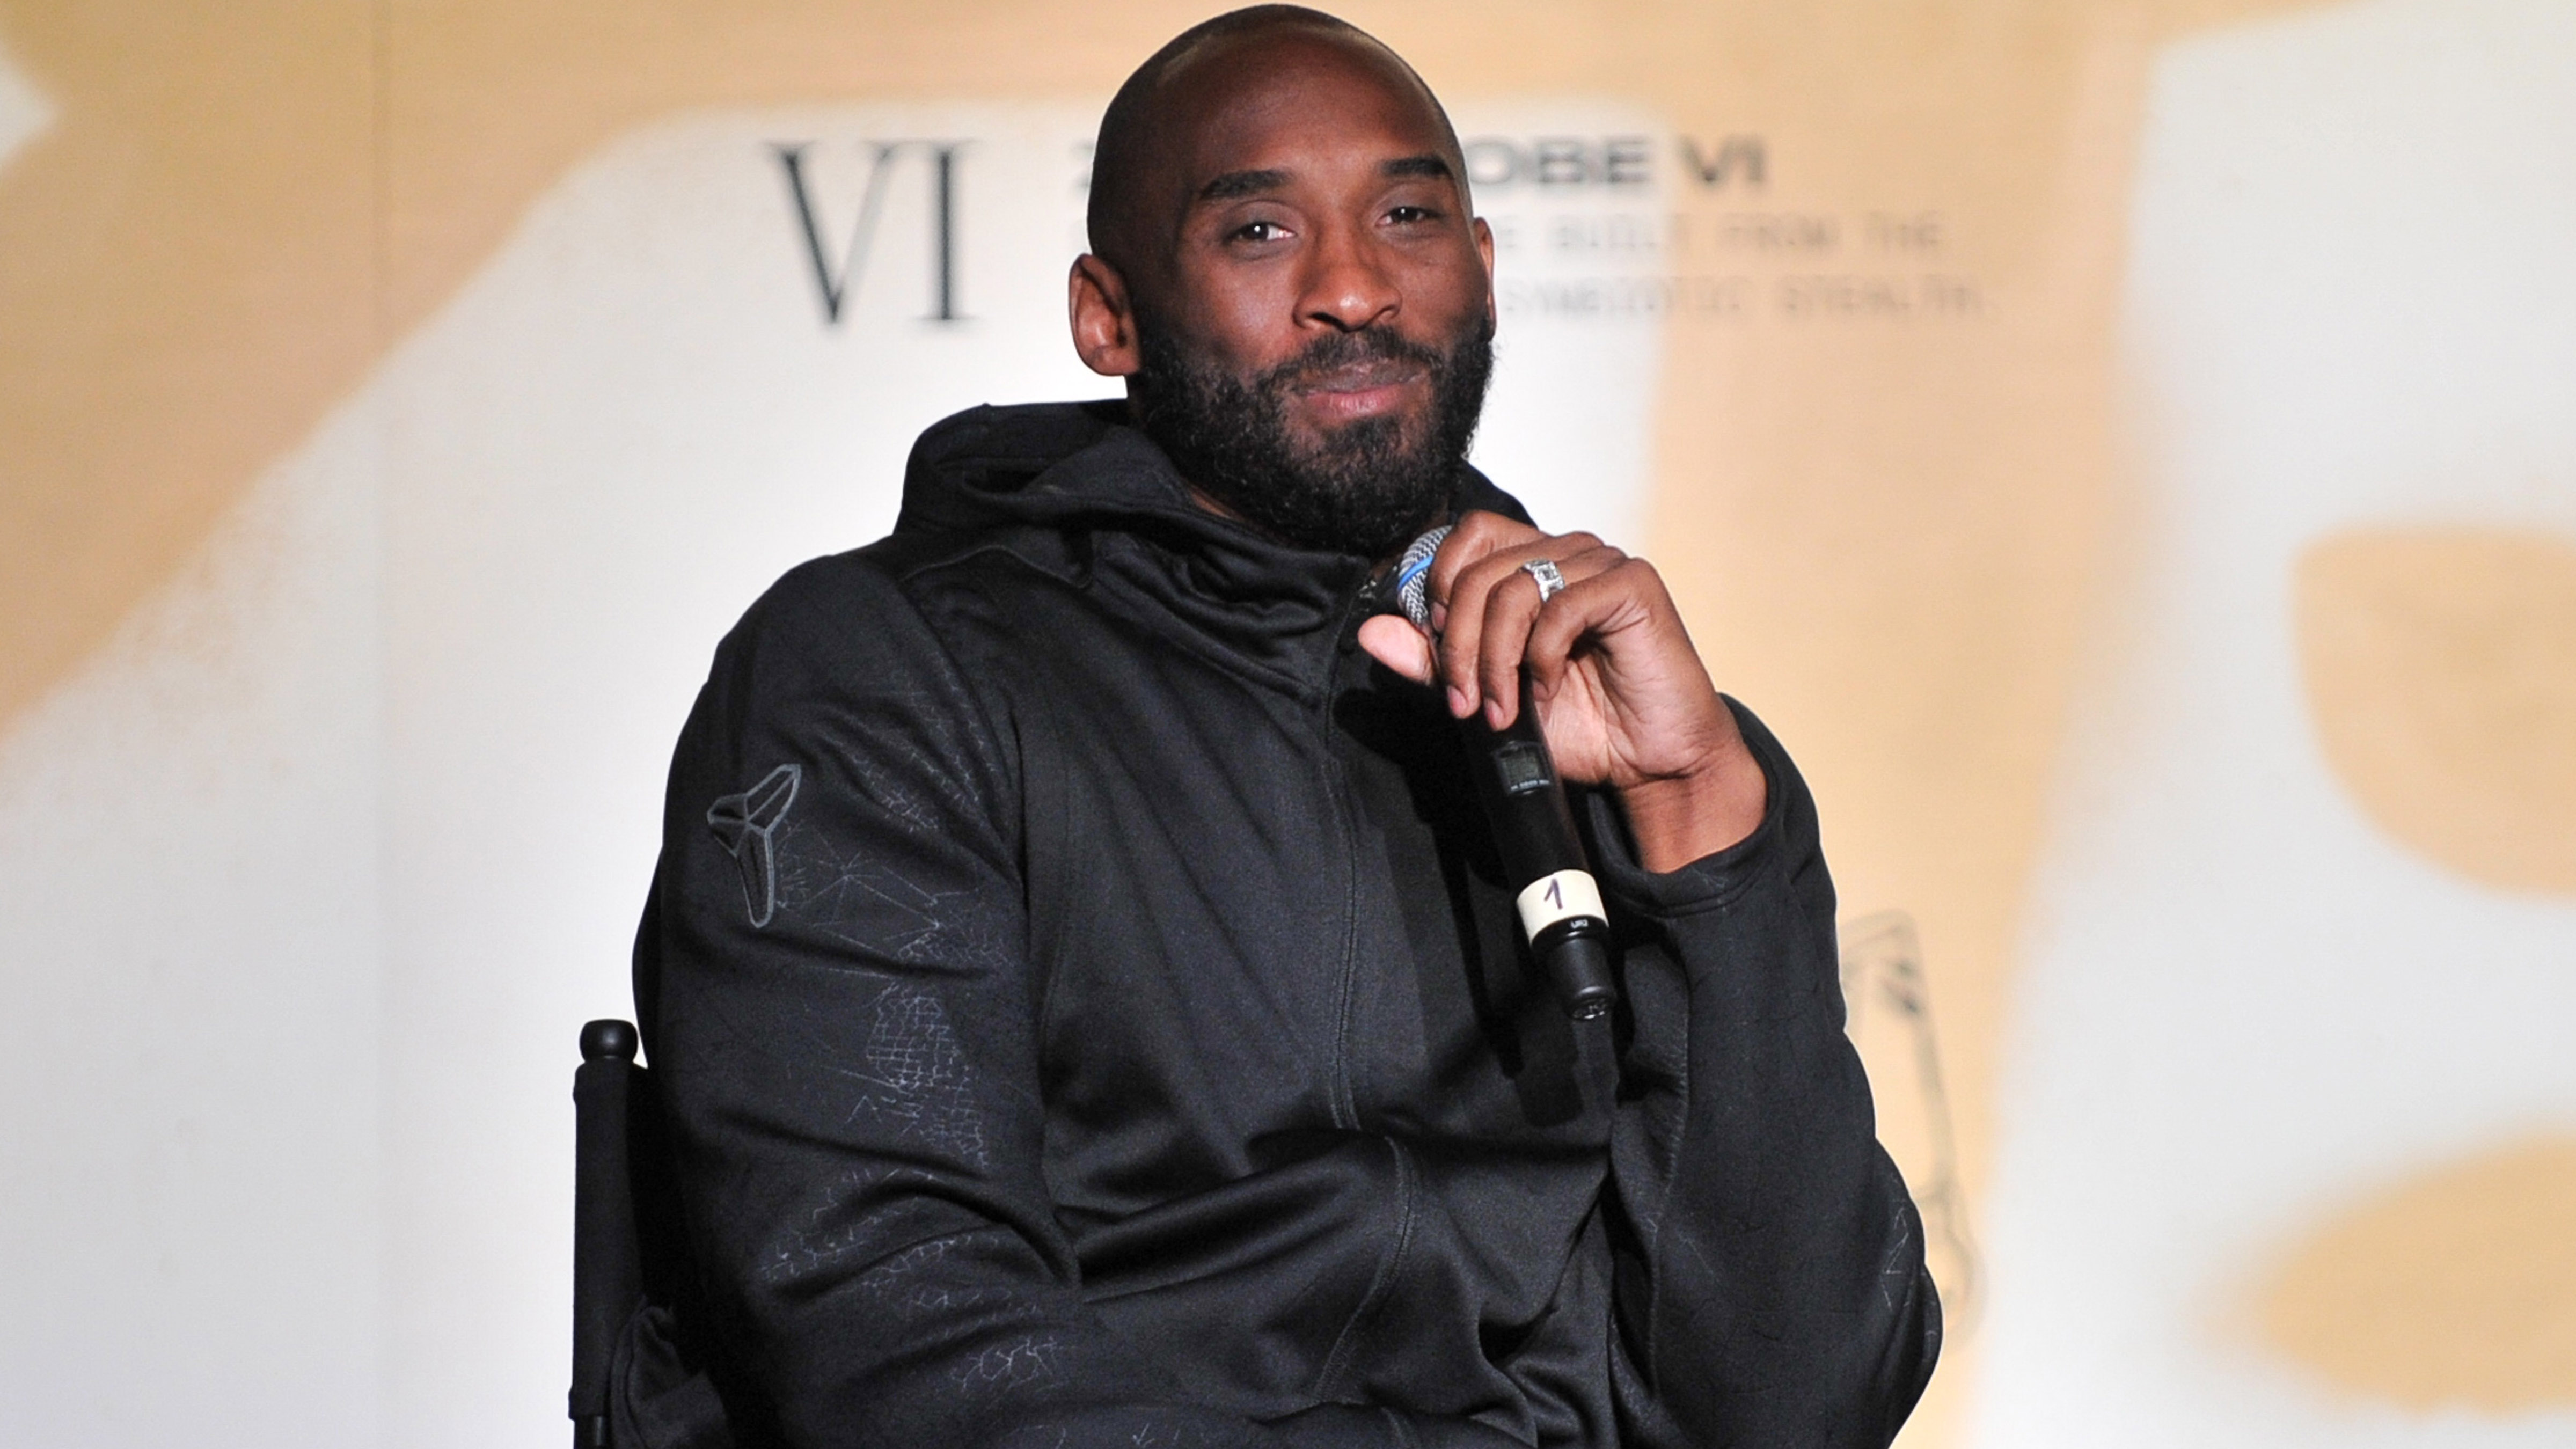 Kobe Bryant dons casual all-Nike outfit while carrying 18-month-old  daughter out of hotel in Paris